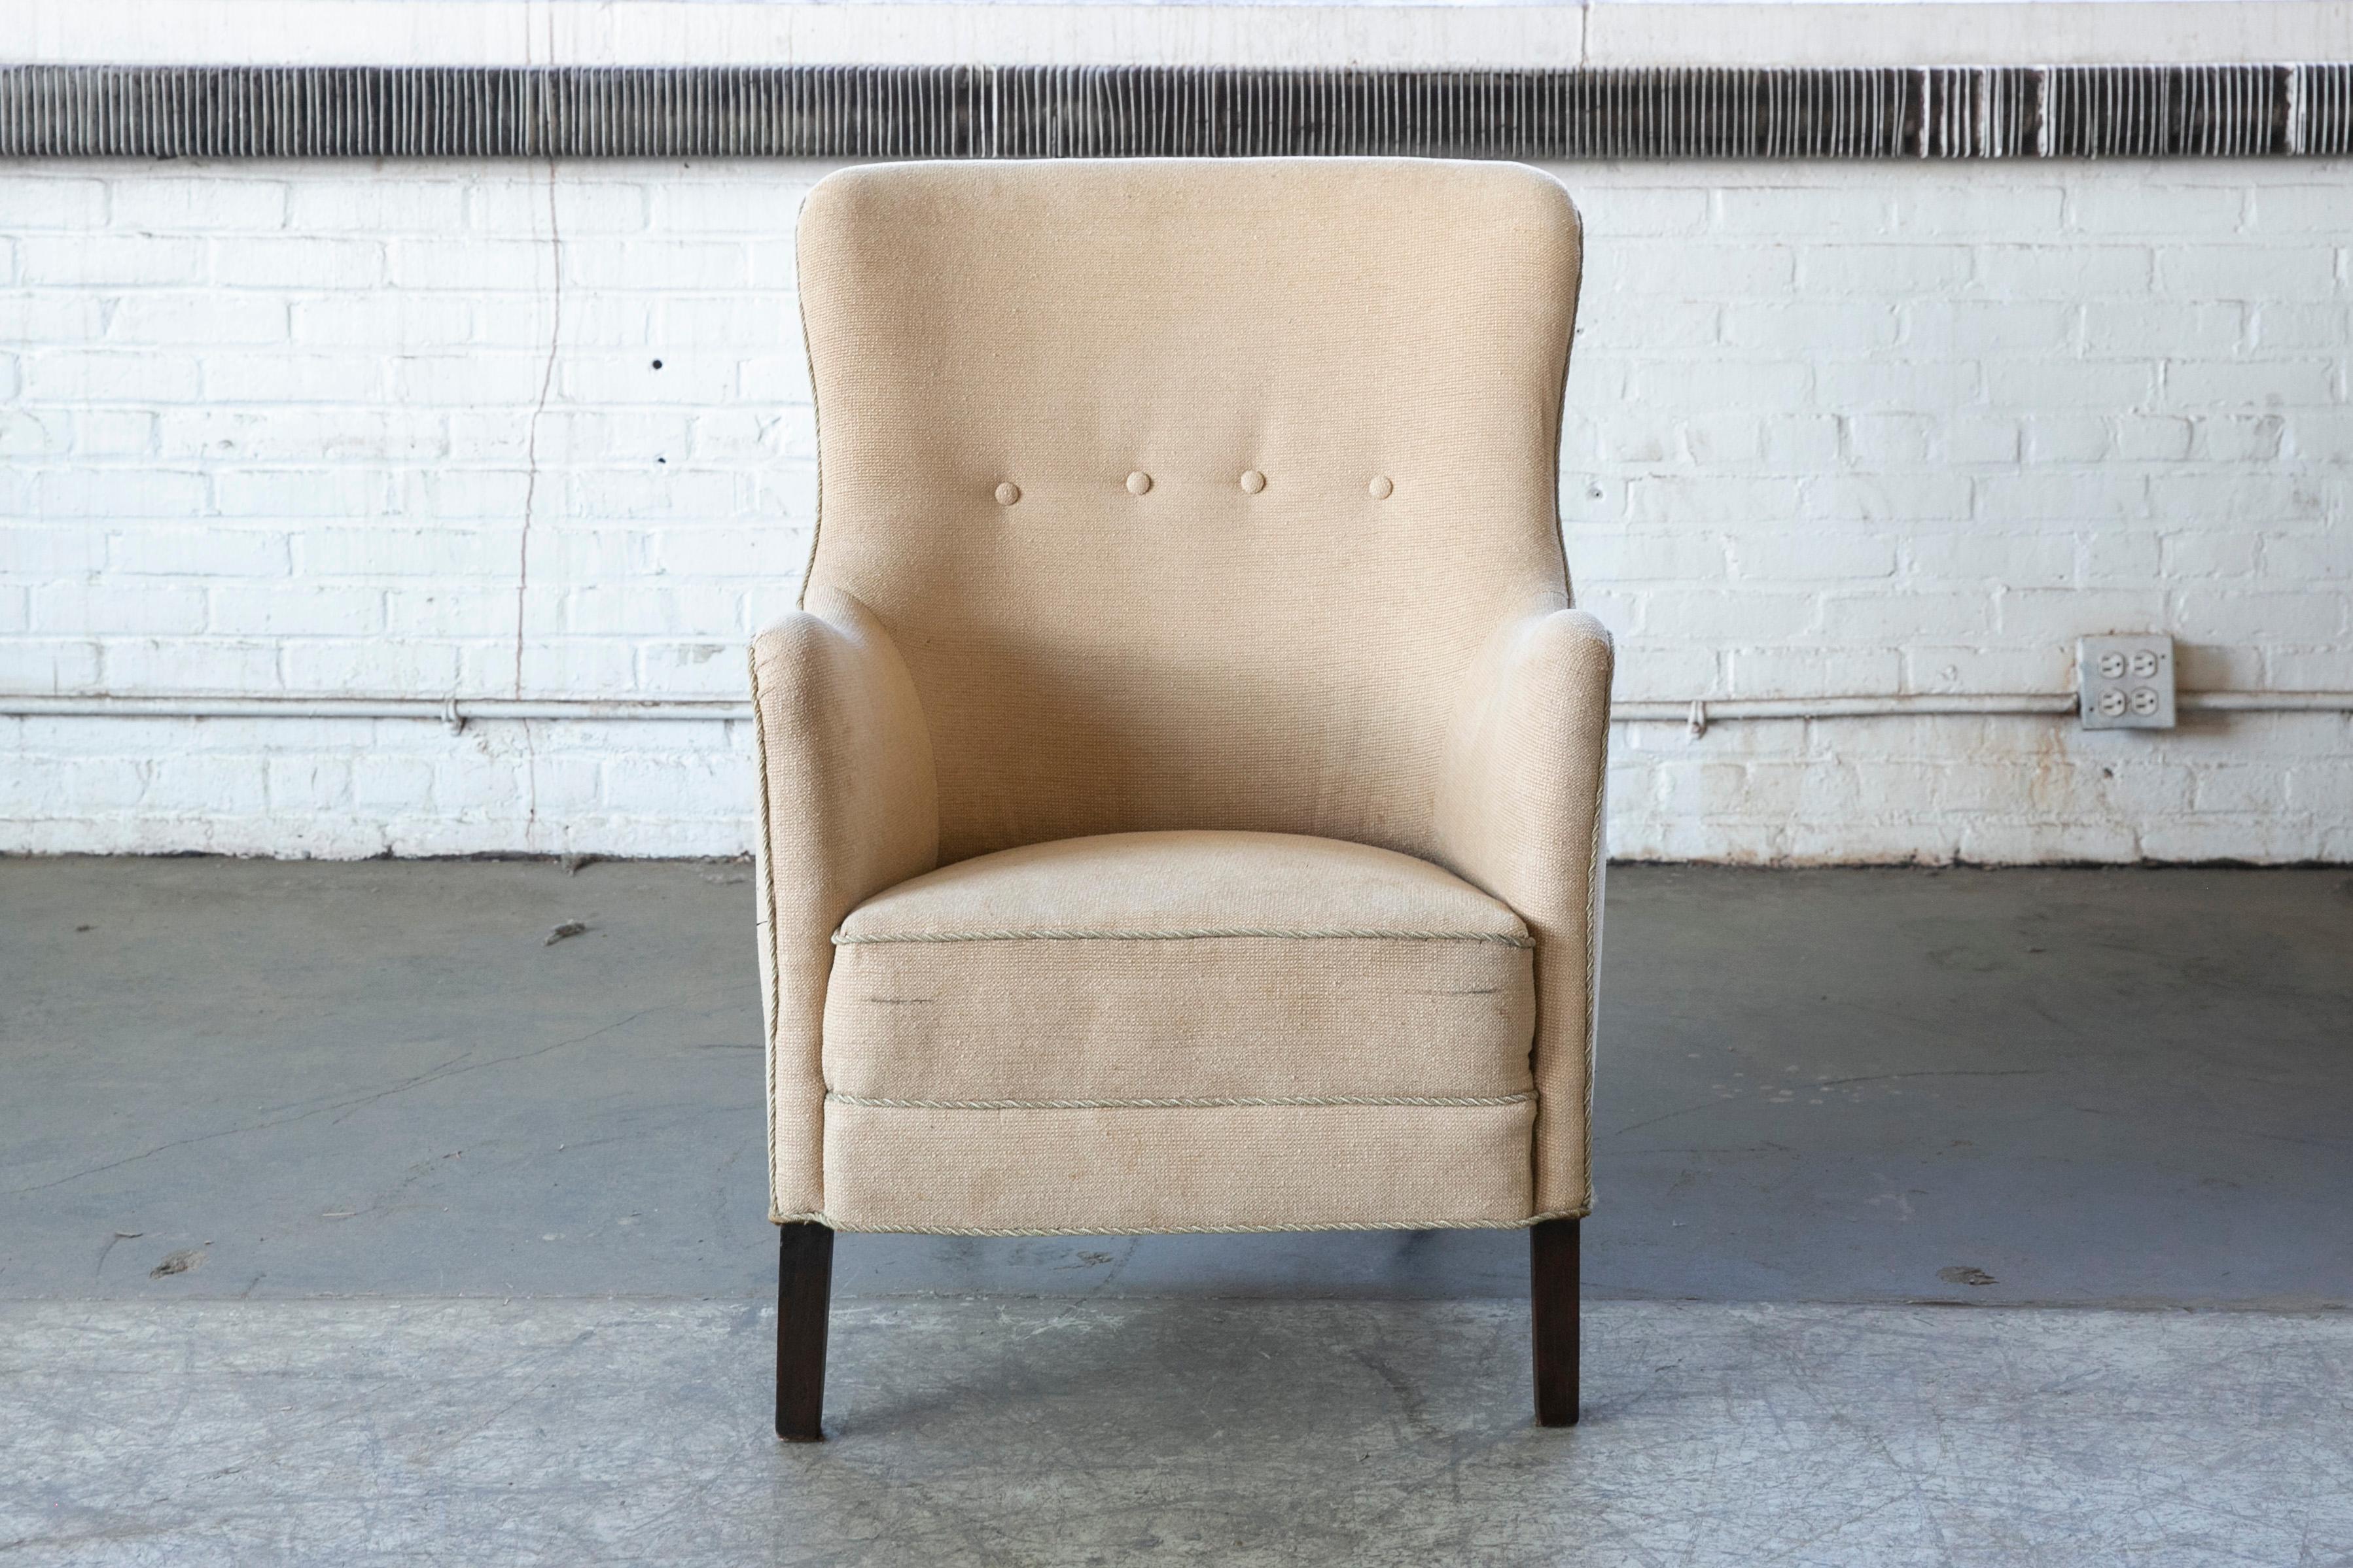 Mid-20th Century Danish 1950s Lounge Chair Attributed to Peter Hvidt & Orla Mølgaard-Nielsen